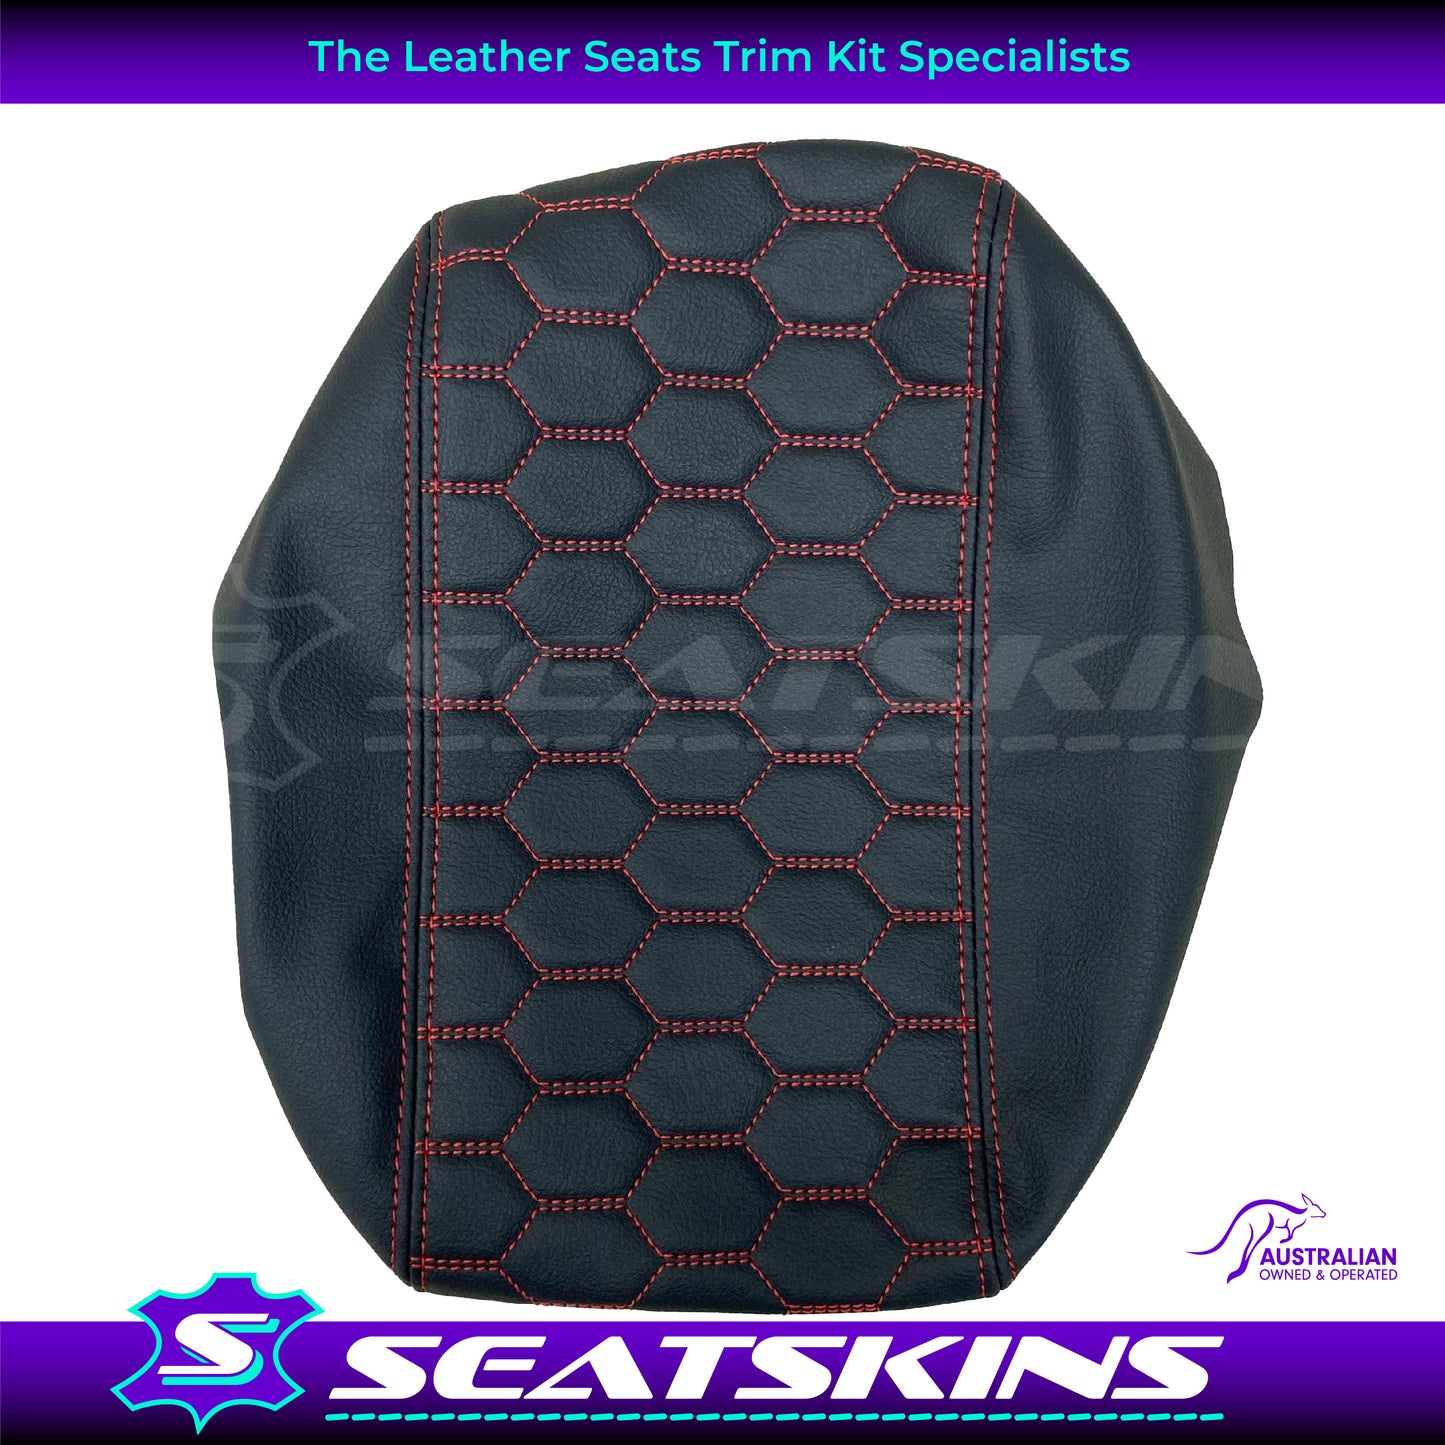 CUSTOM CONSOLE COVER TO FIT HOLDEN VY VZ HEXAGON STITCH CHOOSE COLOUR